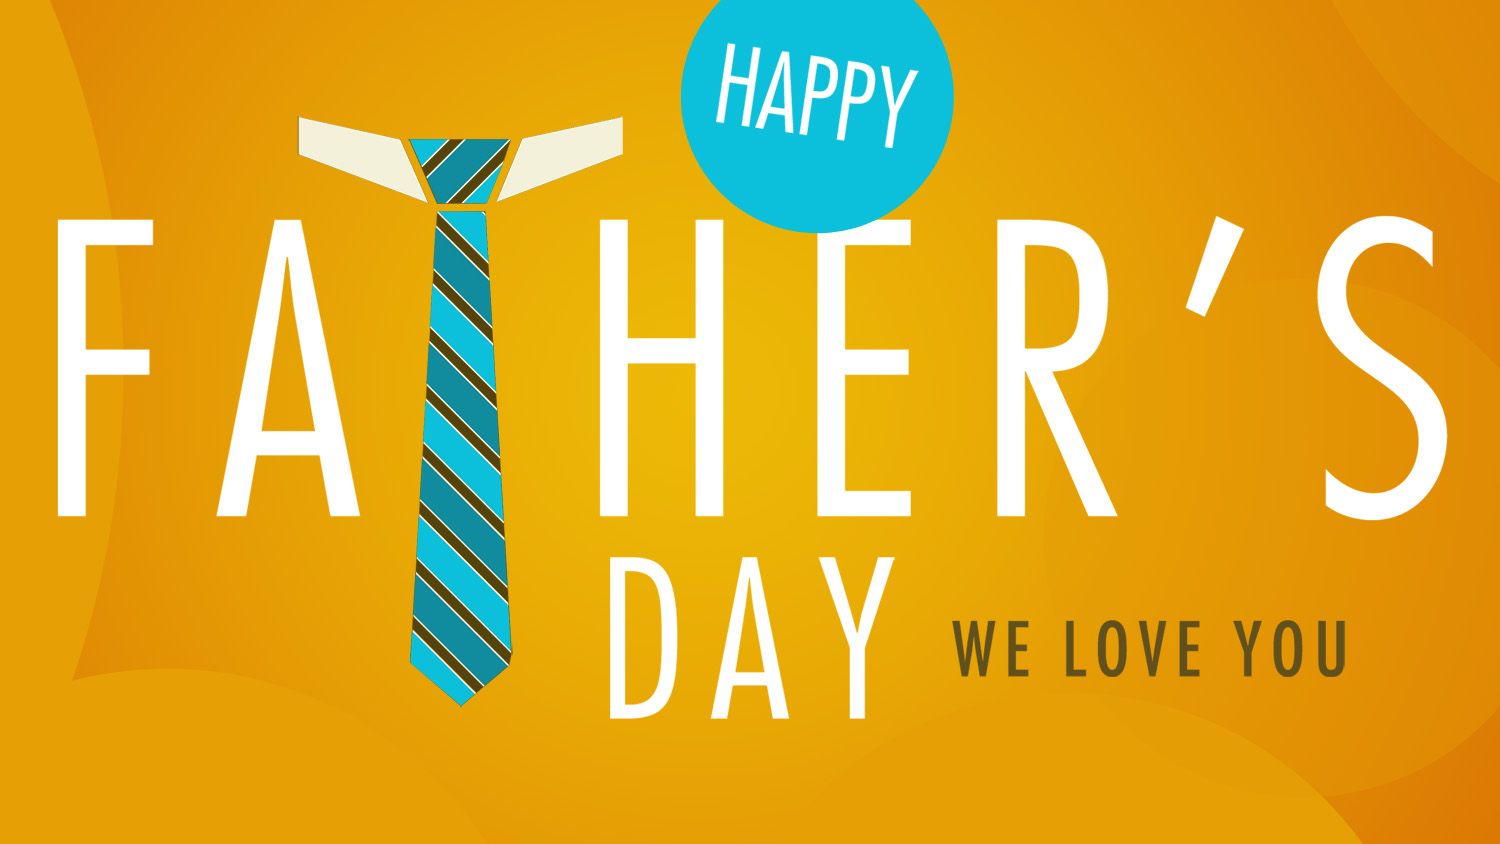 Happy Father'S Day Wallpapers Download Free | Pixelstalk.net